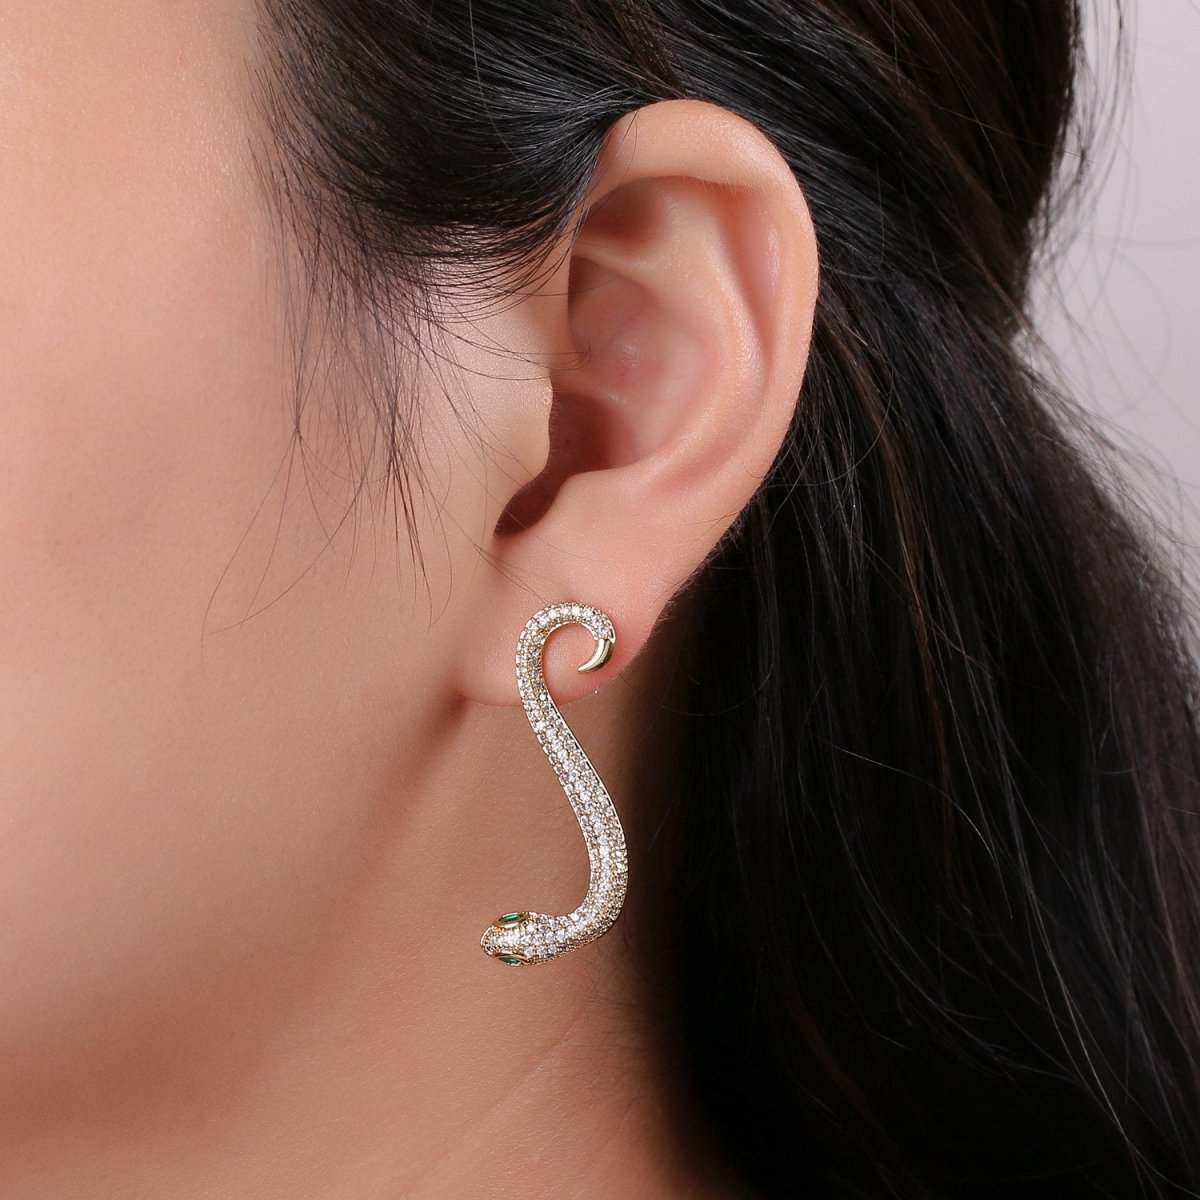 Gold snake earrings asp cleopatra toga serpent dangle 40mm long lightweight earrings Serpent snake Jewelry Micro pave Stud Earring Q-172 Q-173 - DLUXCA